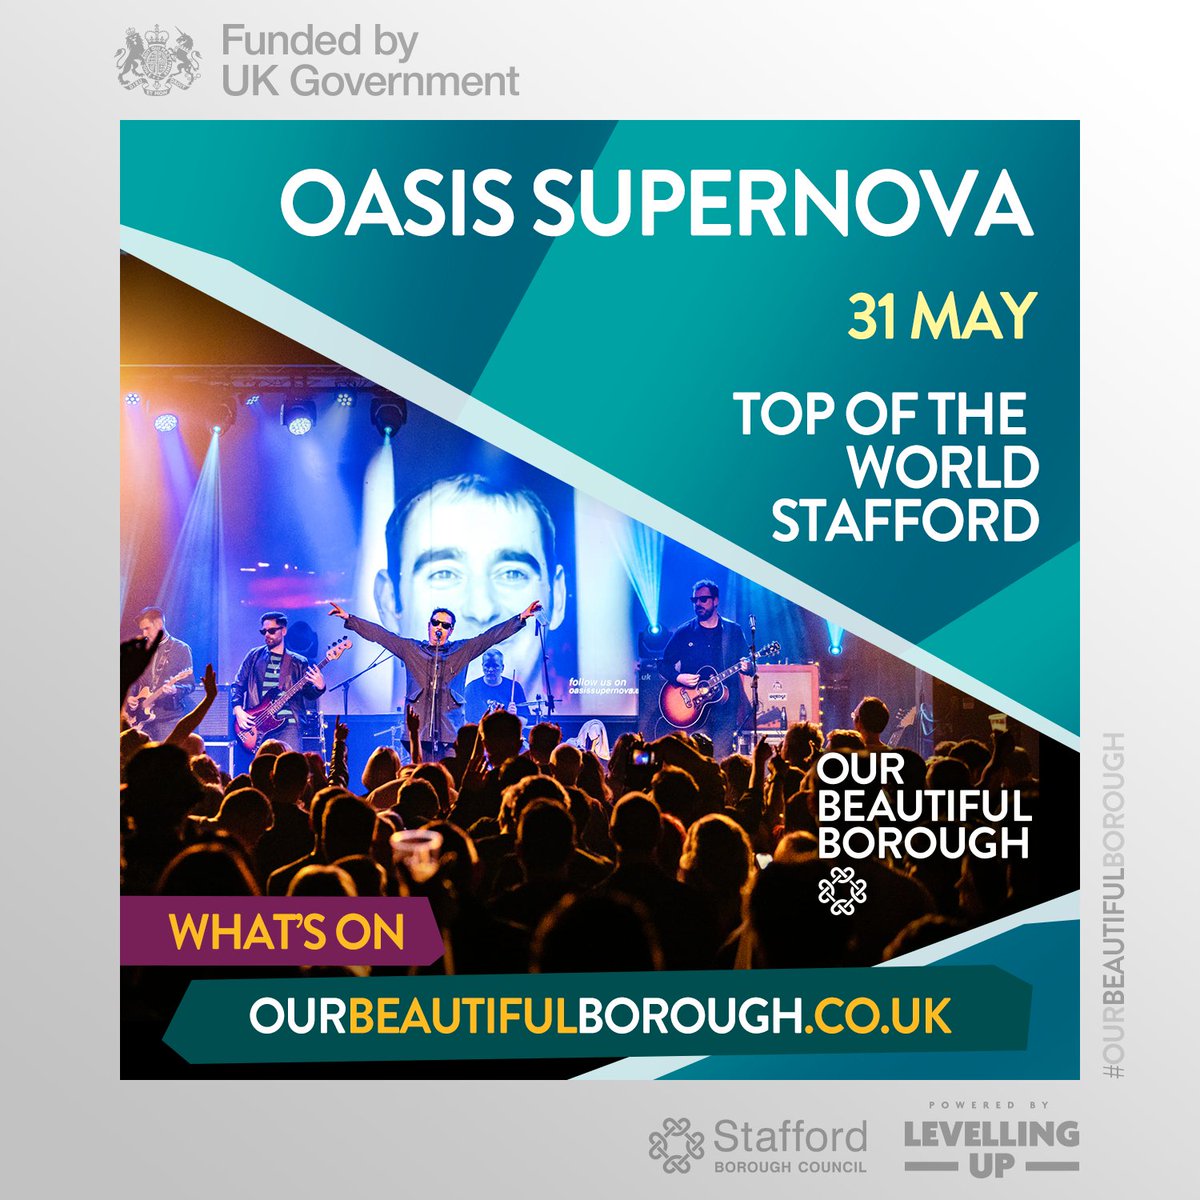 Oasis Supernova is a full live #Oasis tribute, dedicated to the sound, swagger and story of Oasis. Join them at #Couture #TopOfTheWorld, #Stafford on Friday 31 May for a stunning 4K visual show. More info here: tinyurl.com/2rxnhyca #NightsOut #LiveMusic #OurBeautifulBorough